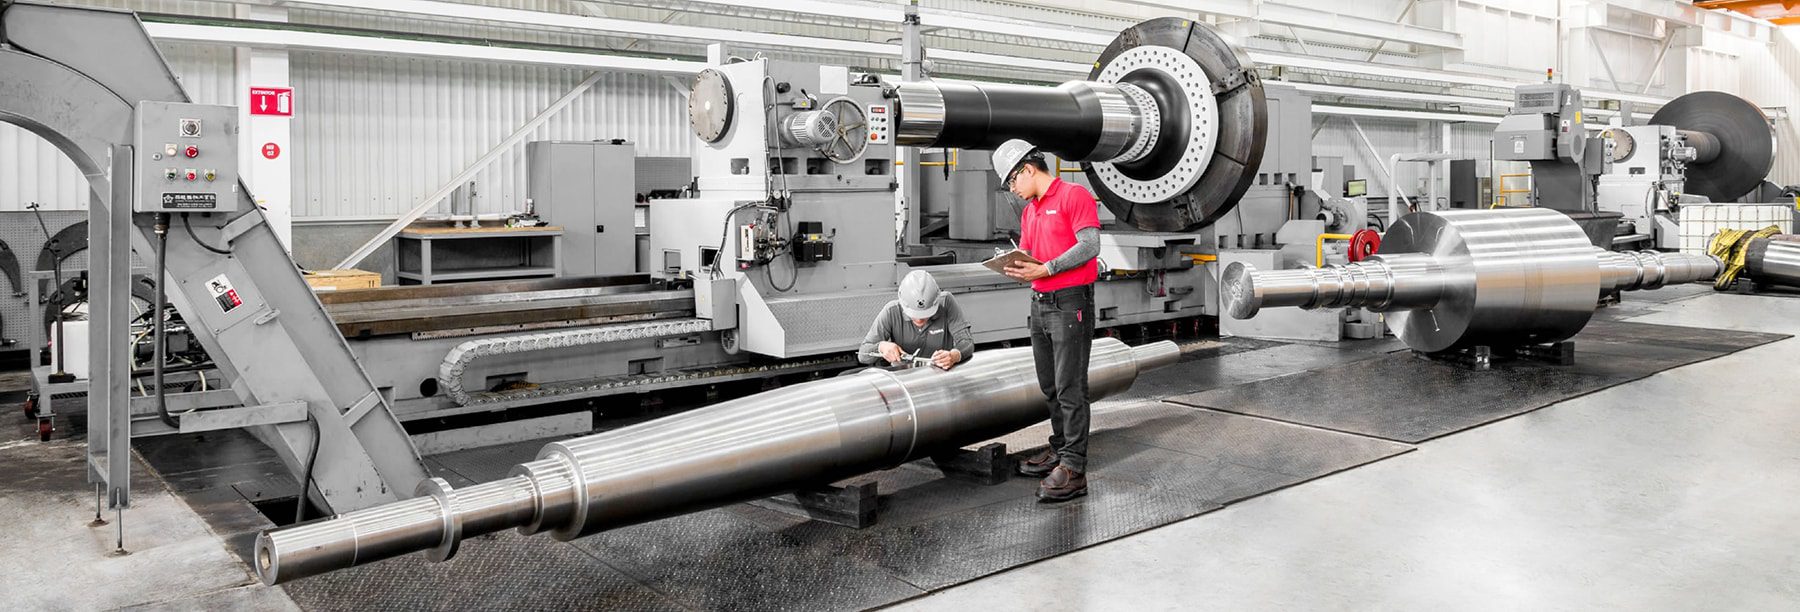 Worker inspecting a large metal shaft on a lathe machine in an industrial setting.